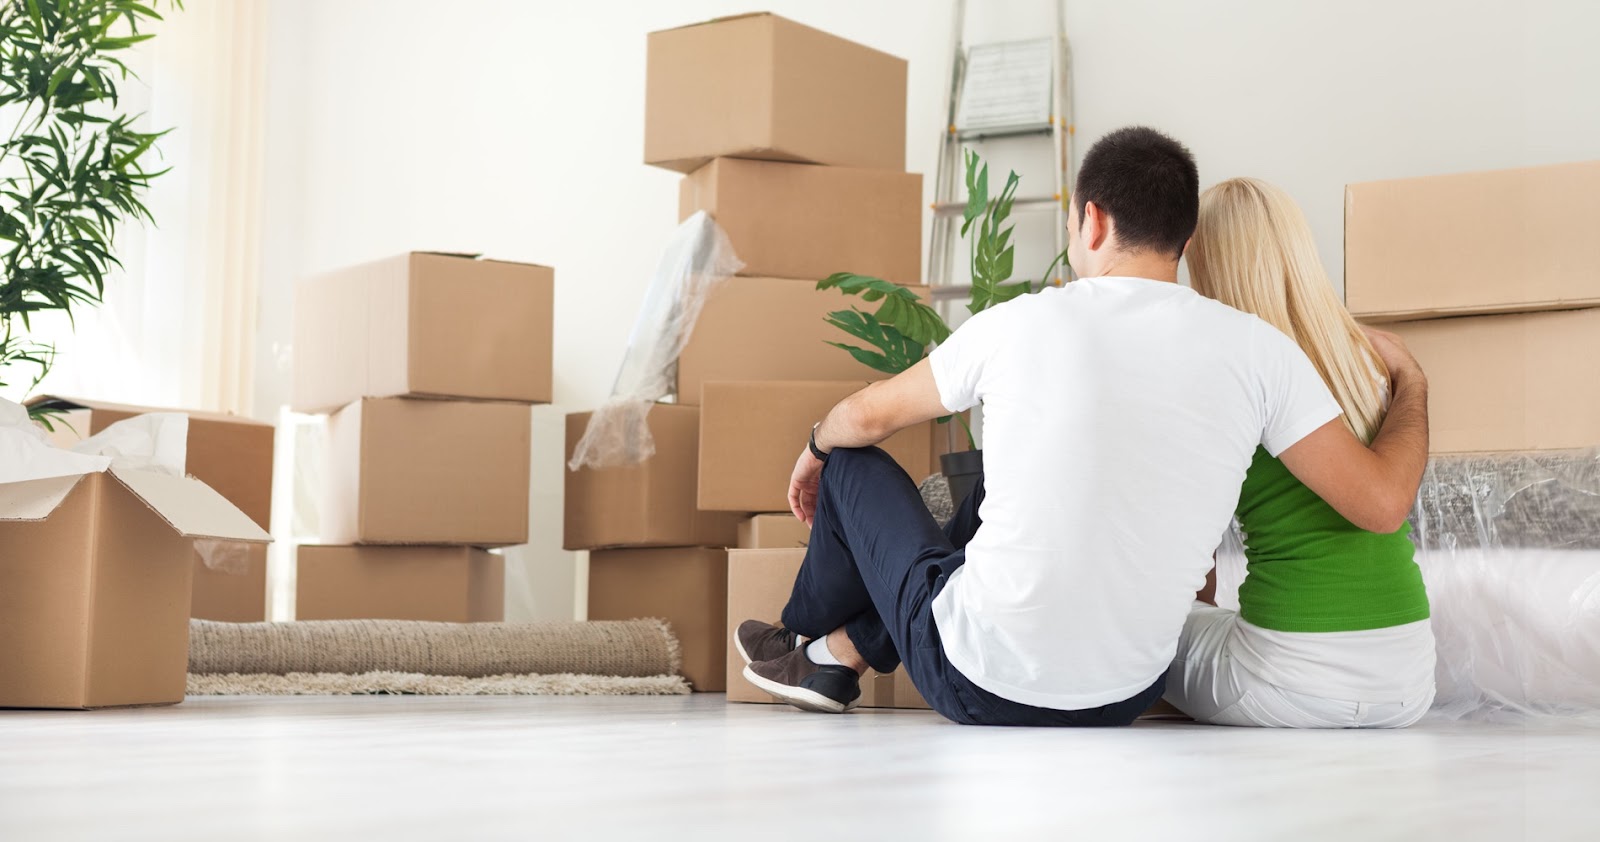 How do you estimate your moving costs in a cubic foot?